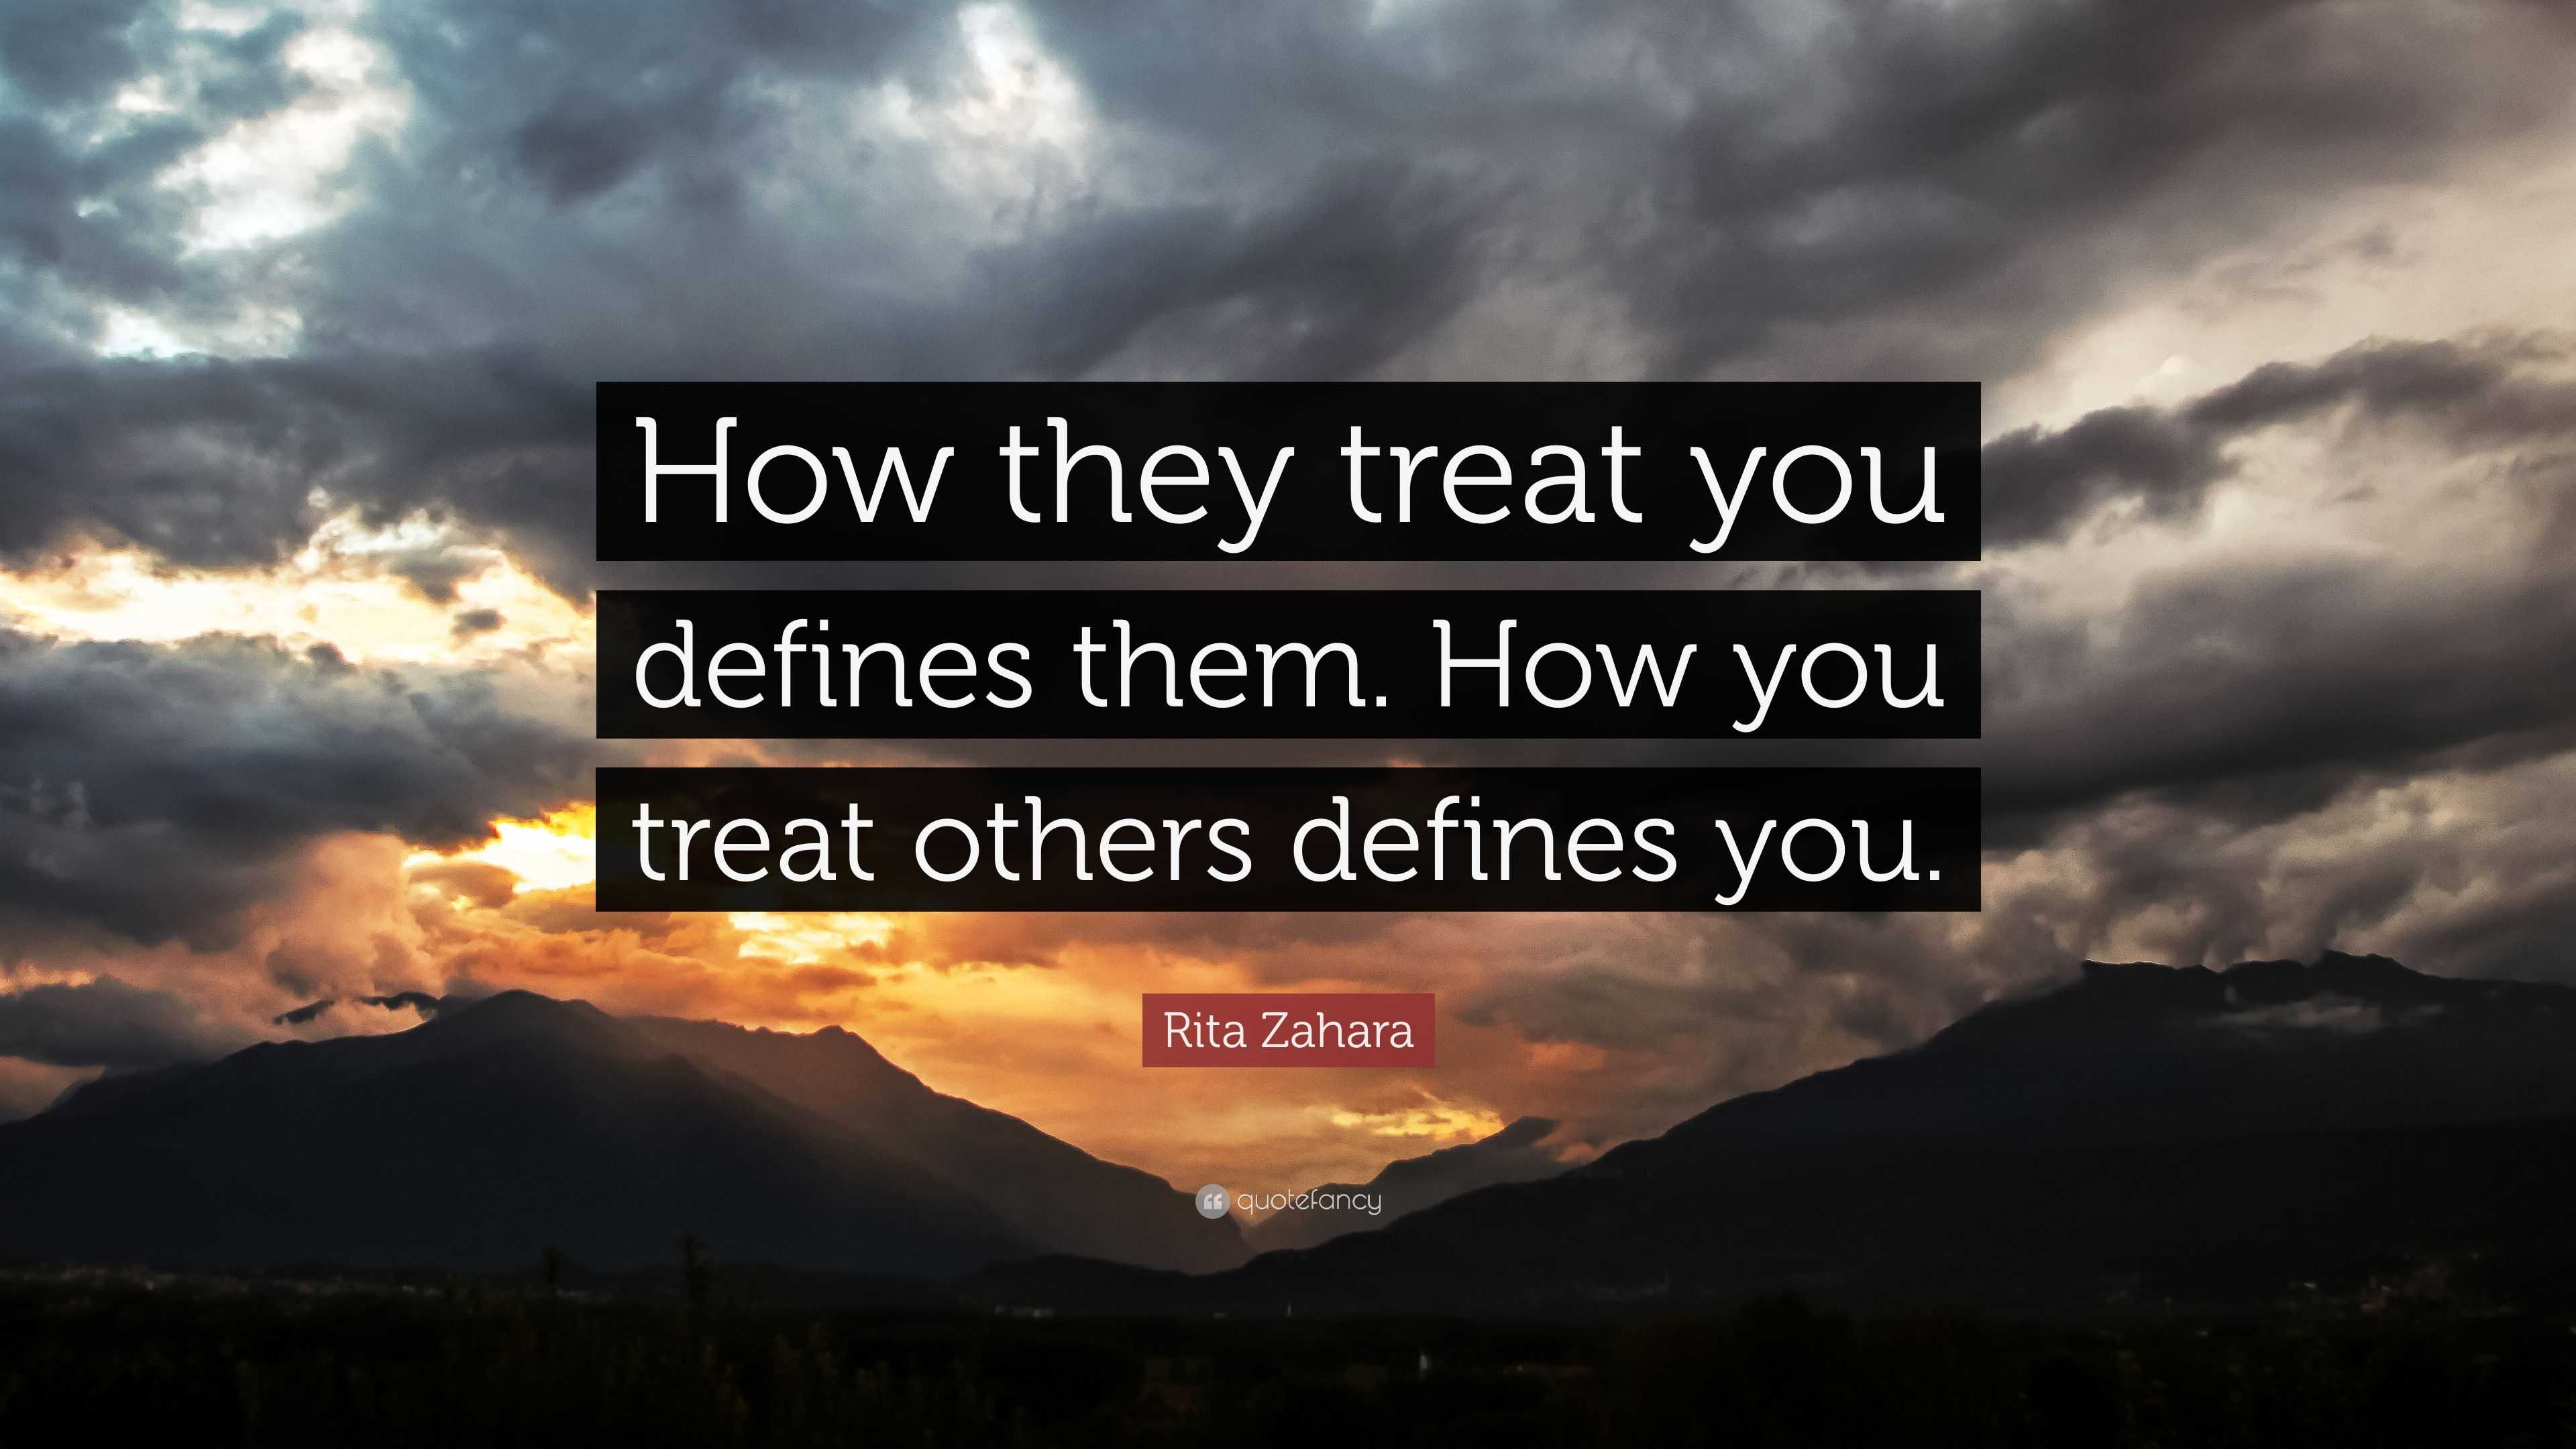 Rita Zahara Quote “how They Treat You Defines Them How You Treat